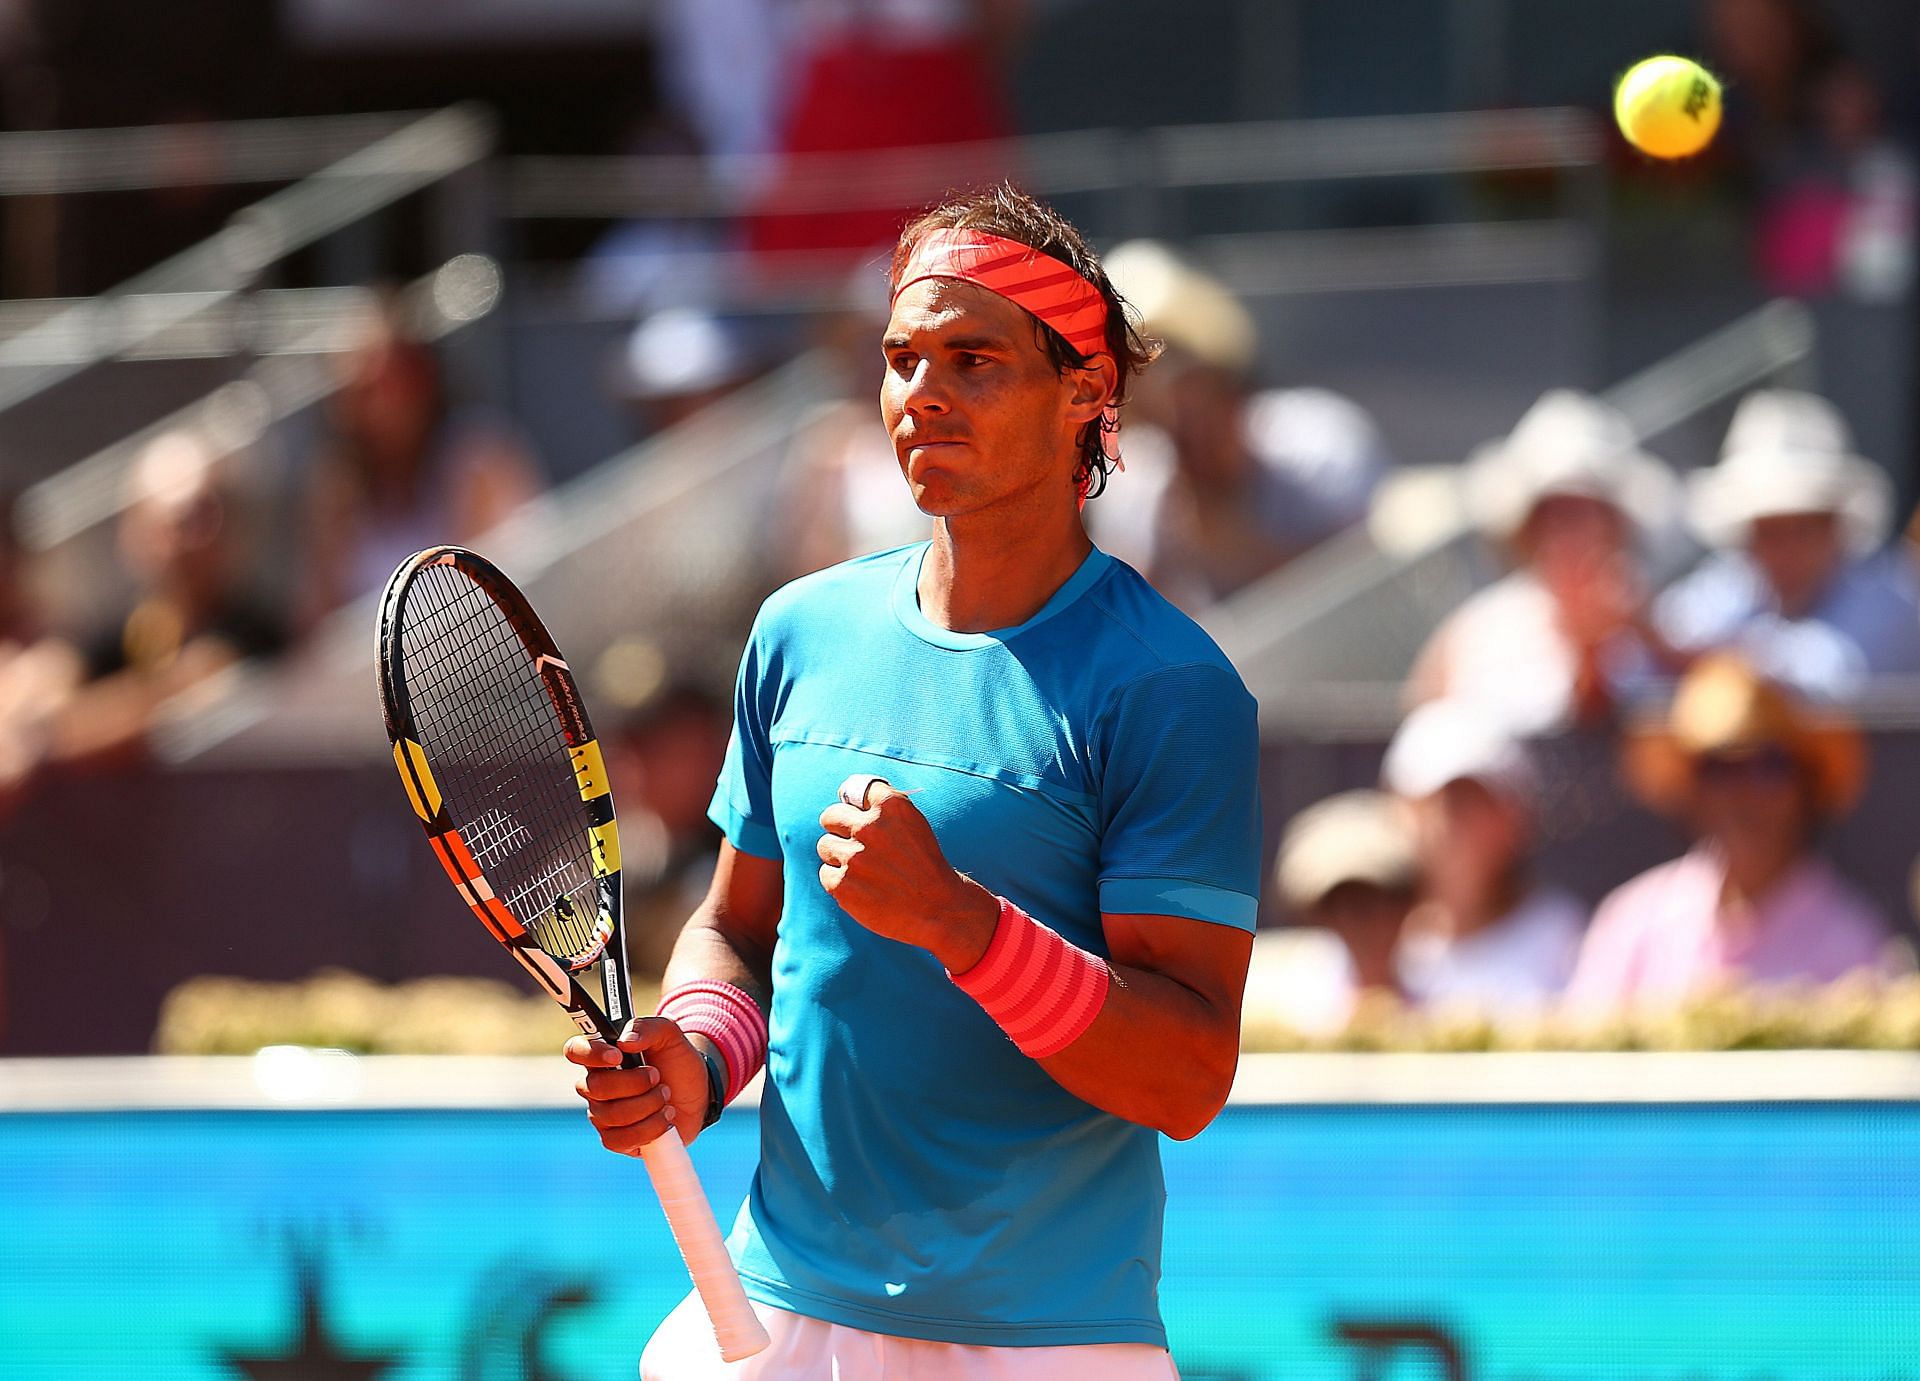 Rafael Nadal went on to win 19 of his next 20 matches against Tomas Berdych